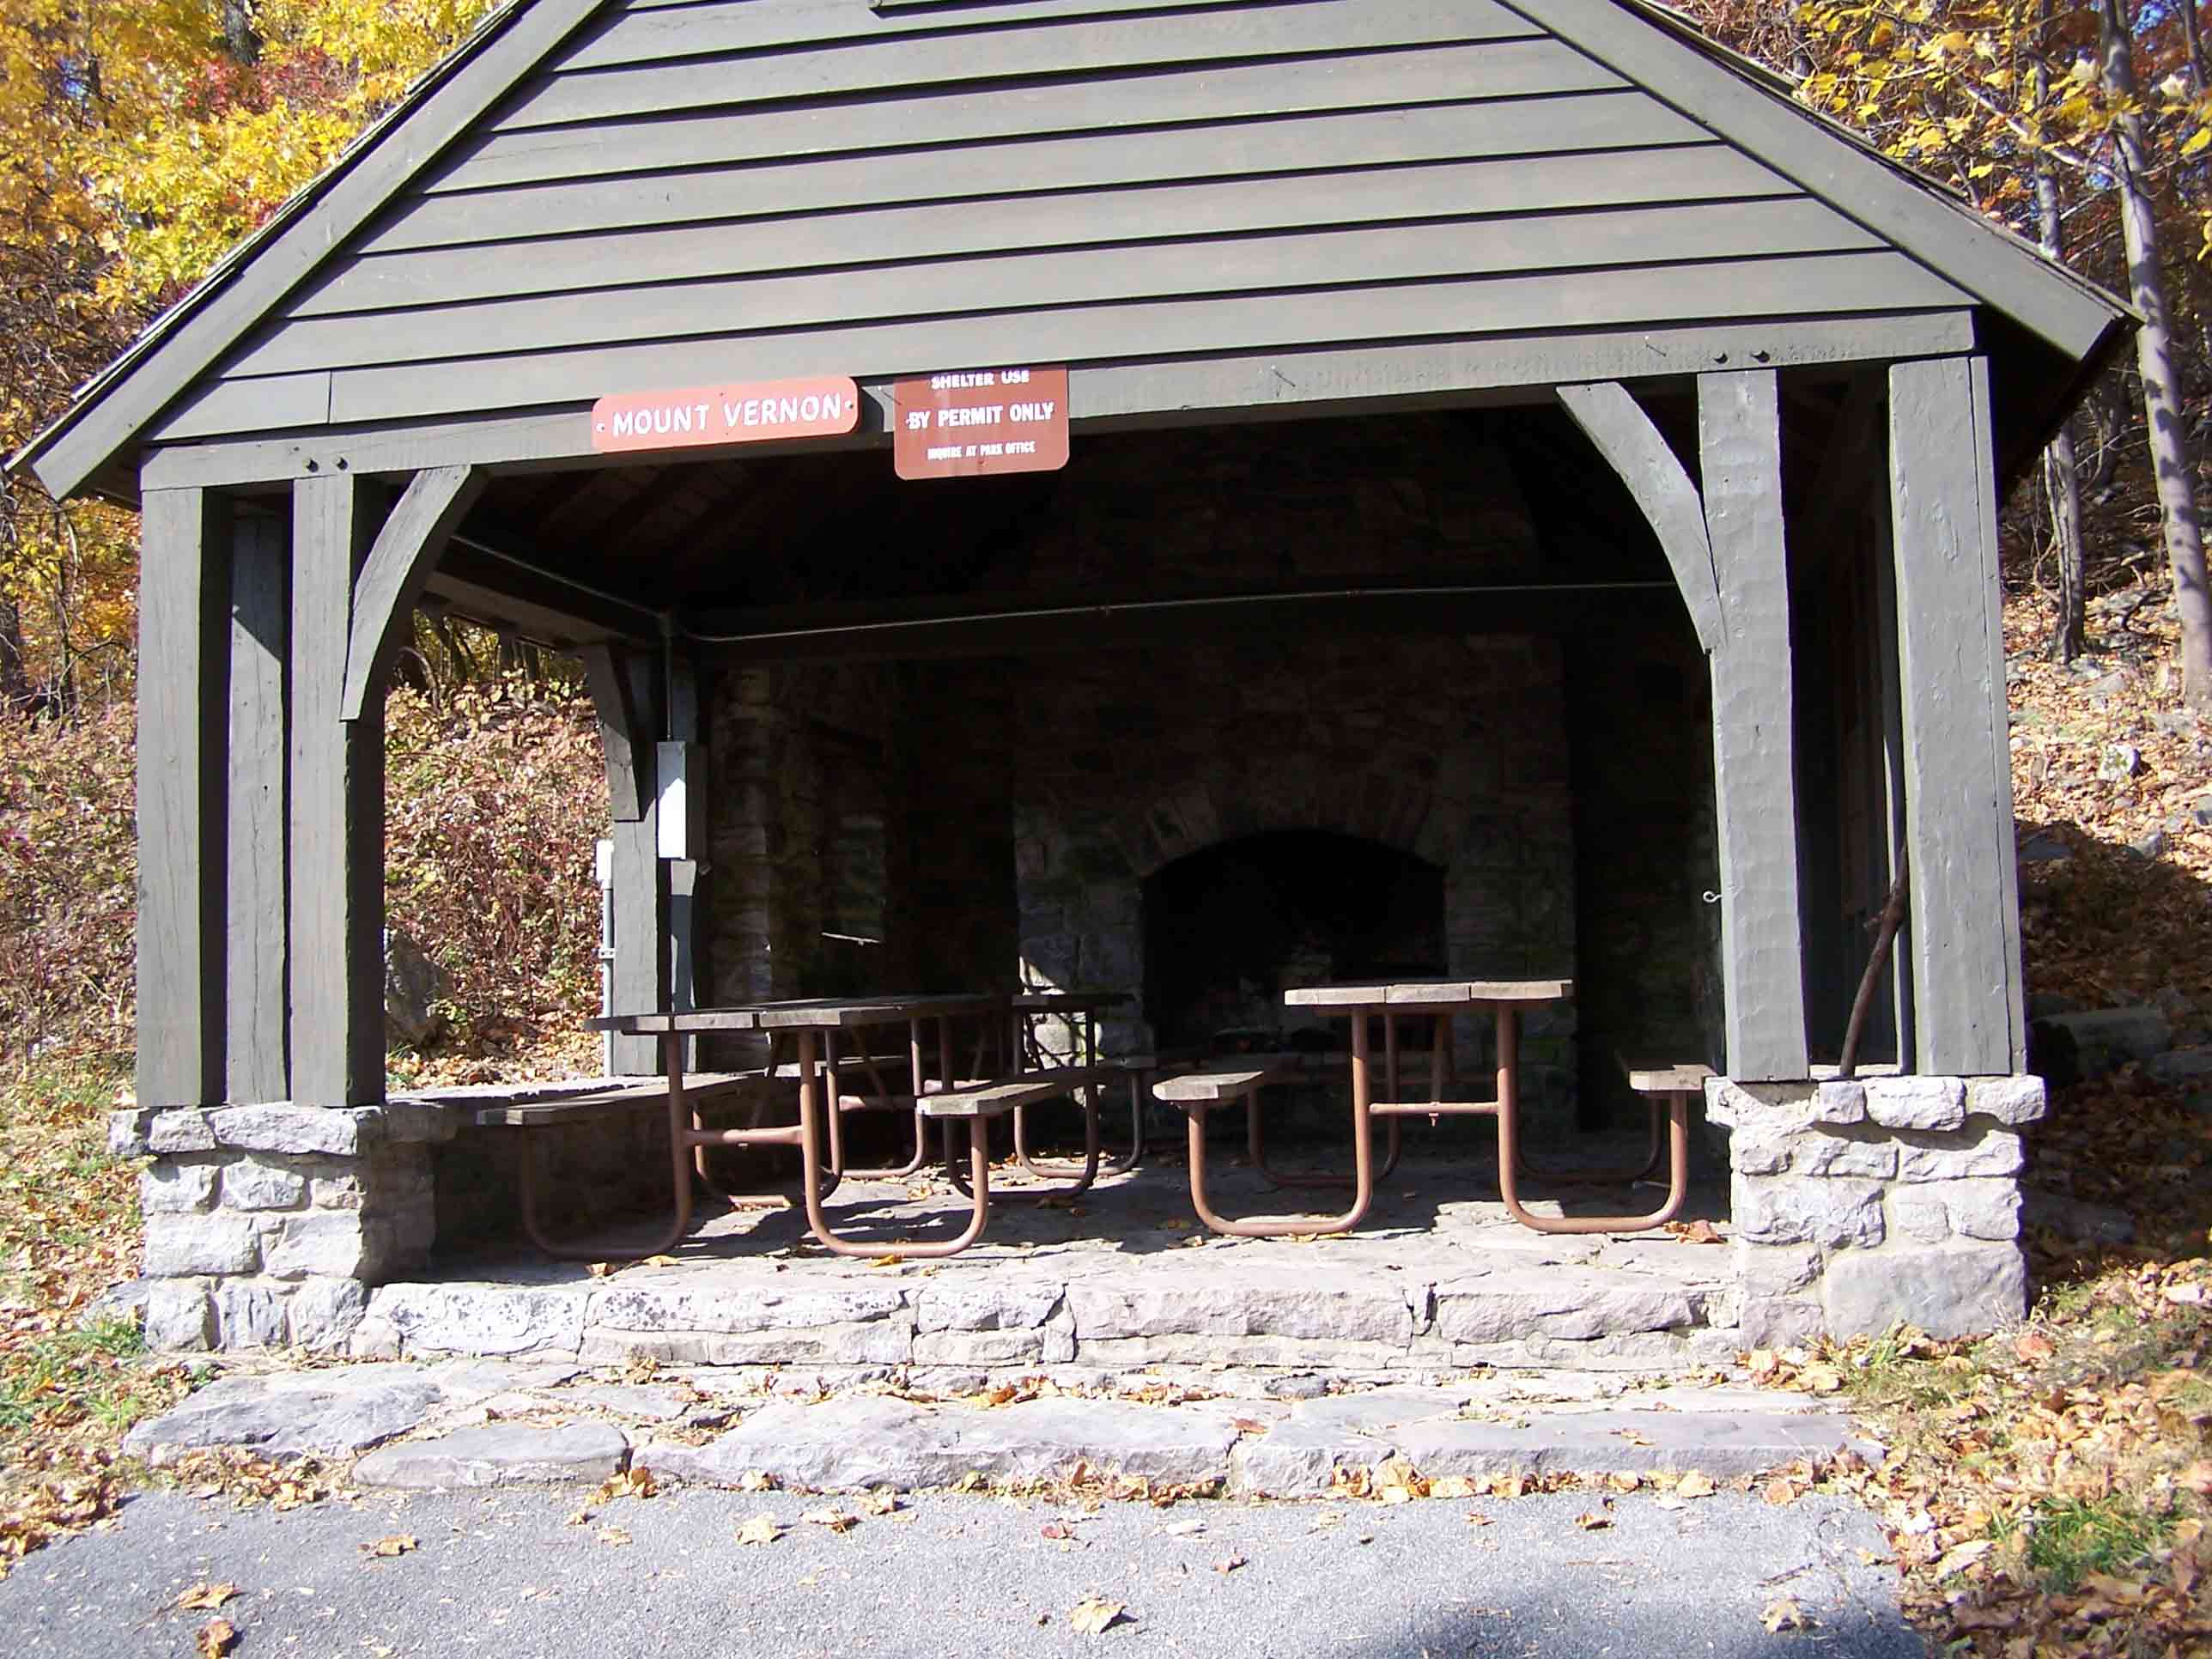 Mount Vernon pavilion with fireplace and picnic tables. Reservation only. Courtesy at@rohland.org